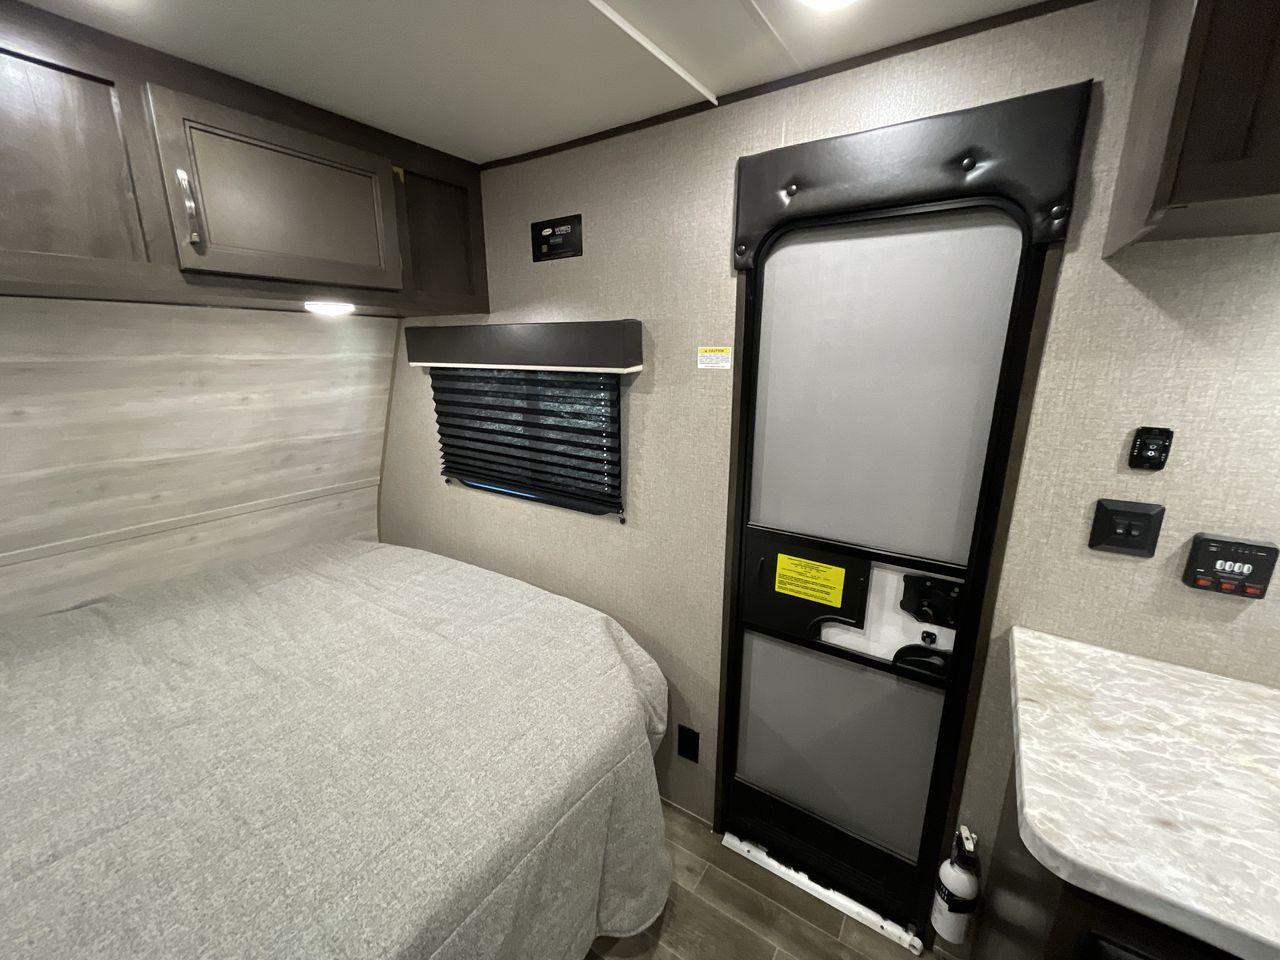 2021 JAYCO JAY FLIGHT SLX 174BH (1UJBJ0AJ1M1) , Length: 21.67 ft | Dry Weight: 3,075 lbs | GVWR: 3,950 lbs | Slides: 0 transmission, located at 4319 N Main Street, Cleburne, TX, 76033, (817) 221-0660, 32.435829, -97.384178 - Take the 2021 Jayco Jay Flight SLX 174BH travel trailer out on your camping adventures. This lightweight and small RV is ideal for people looking for an affordable and cozy way to enjoy the great outdoors. The dimensions of this unit are 21.67 ft in length, 7.08 ft in width, and 9.17 ft in height. I - Photo #17